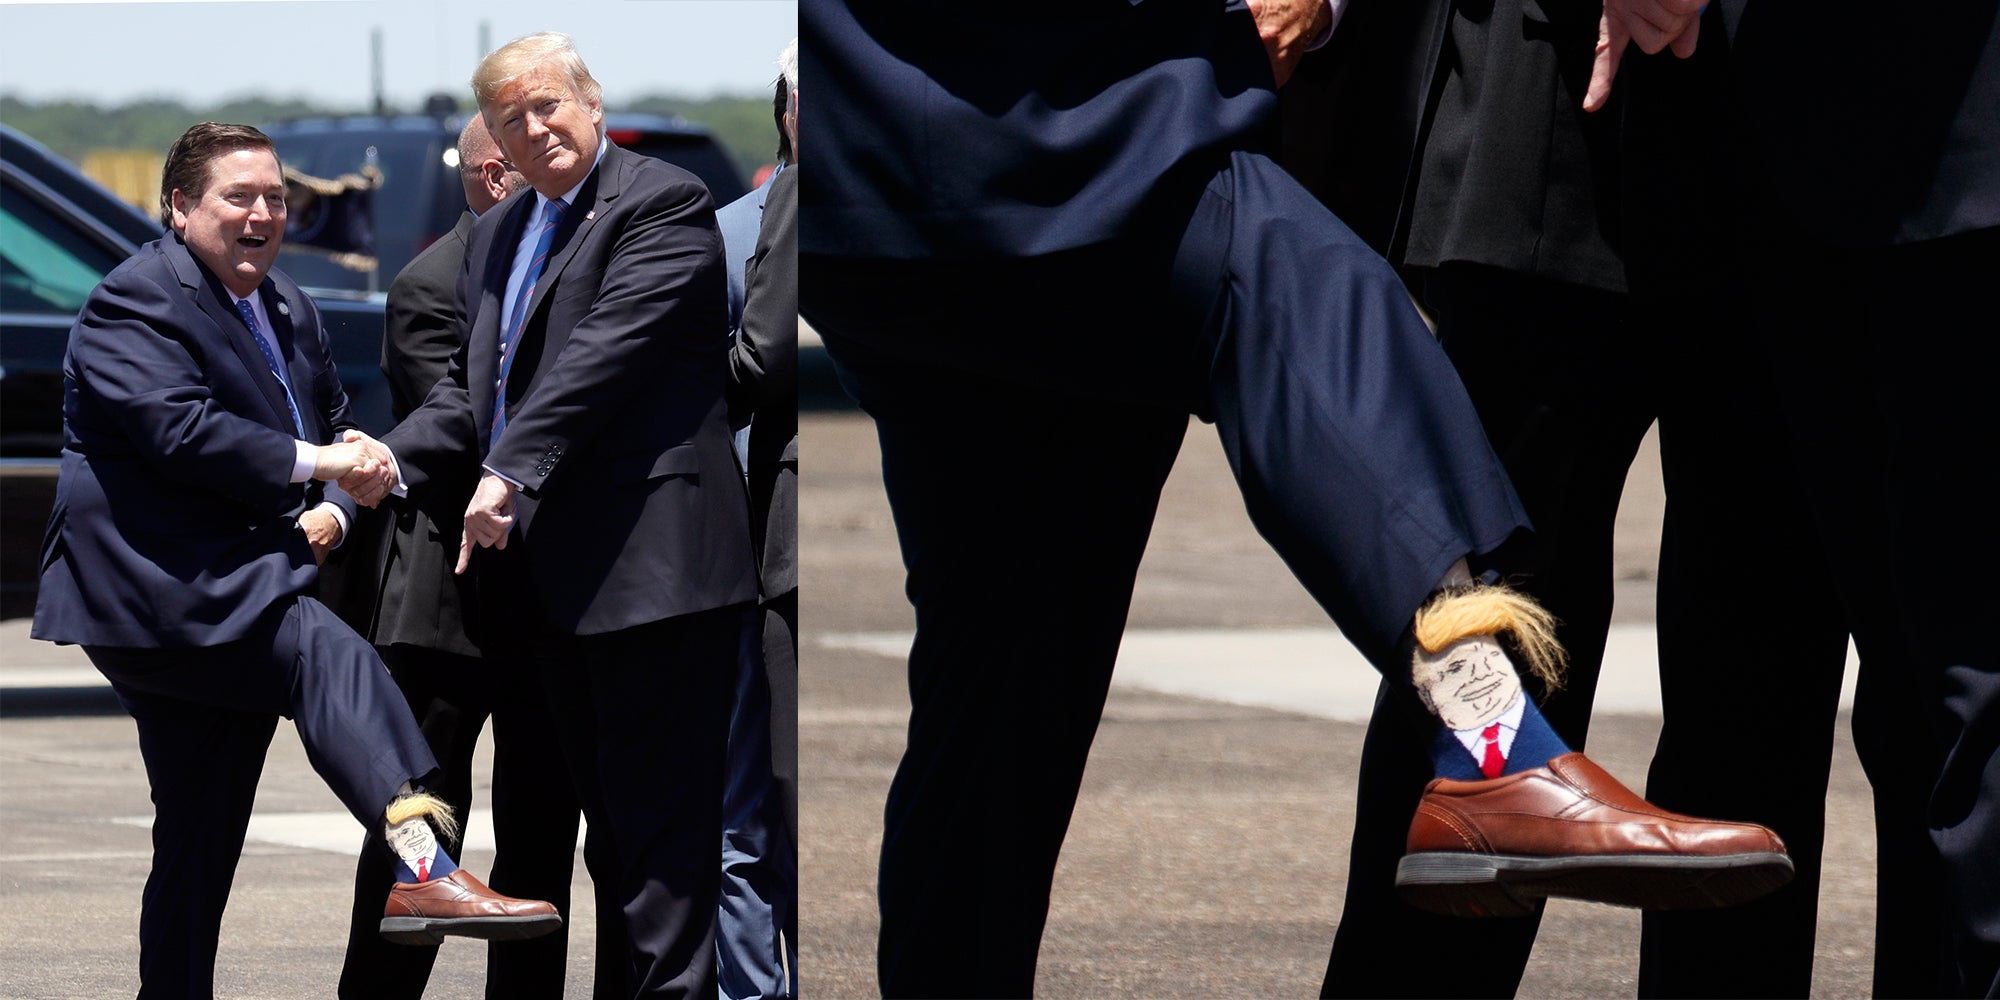 A Louisana politician wore &#39;Trump socks&#39; to meet the president | indy100